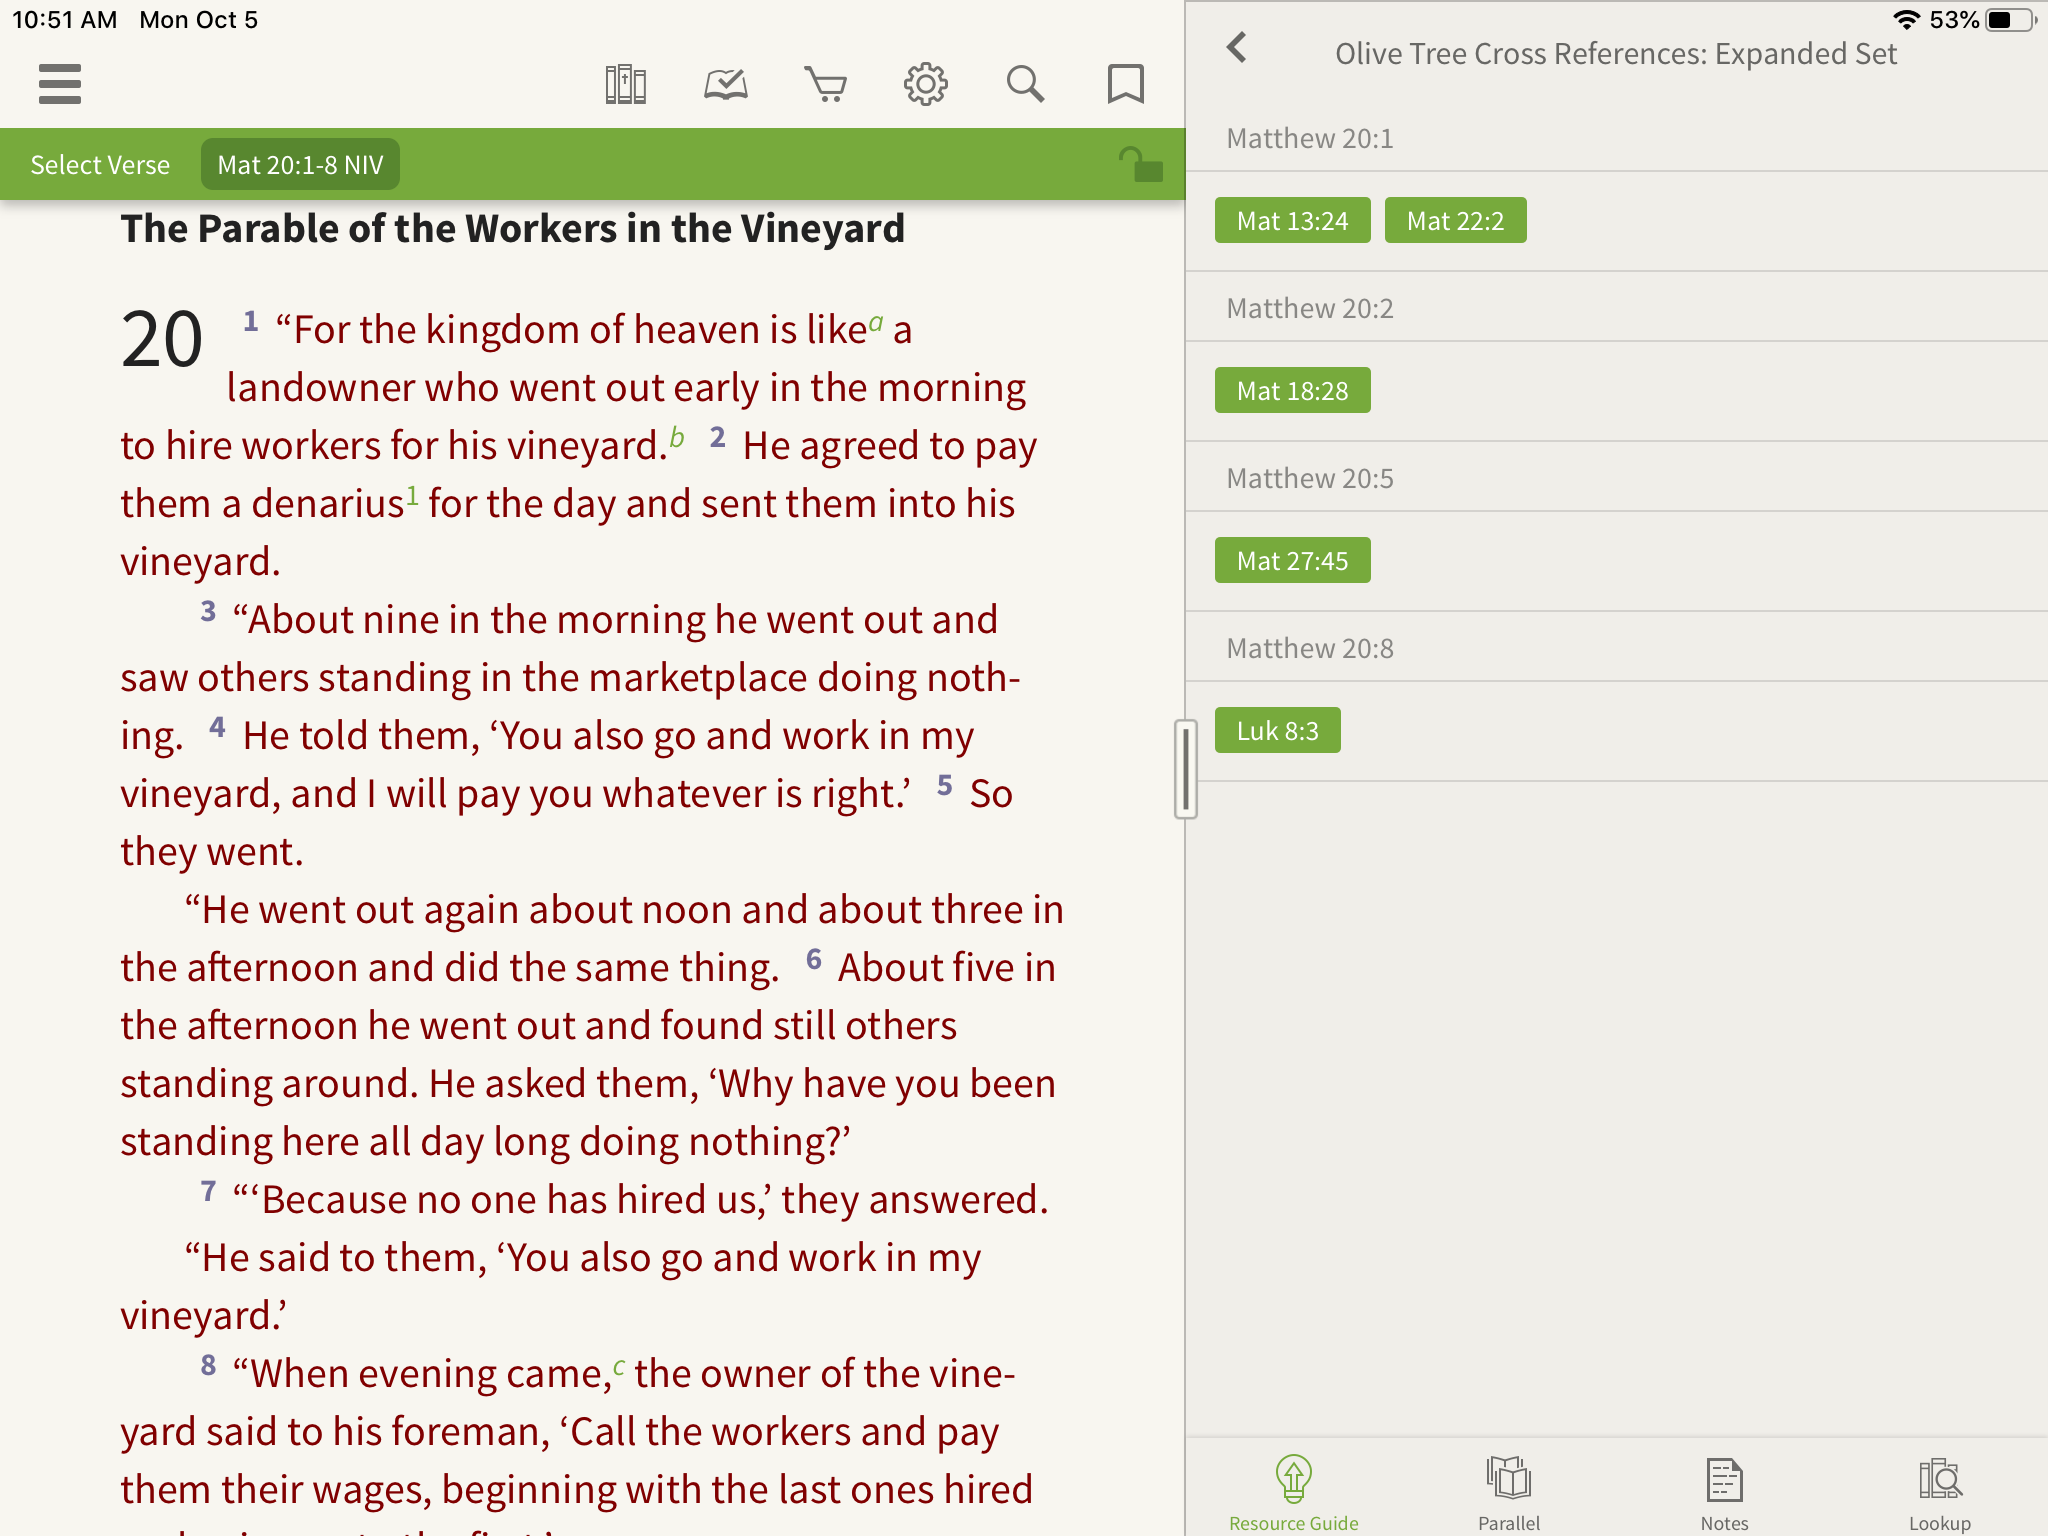 Olive Tree Bible App choose a passage to cross-reference